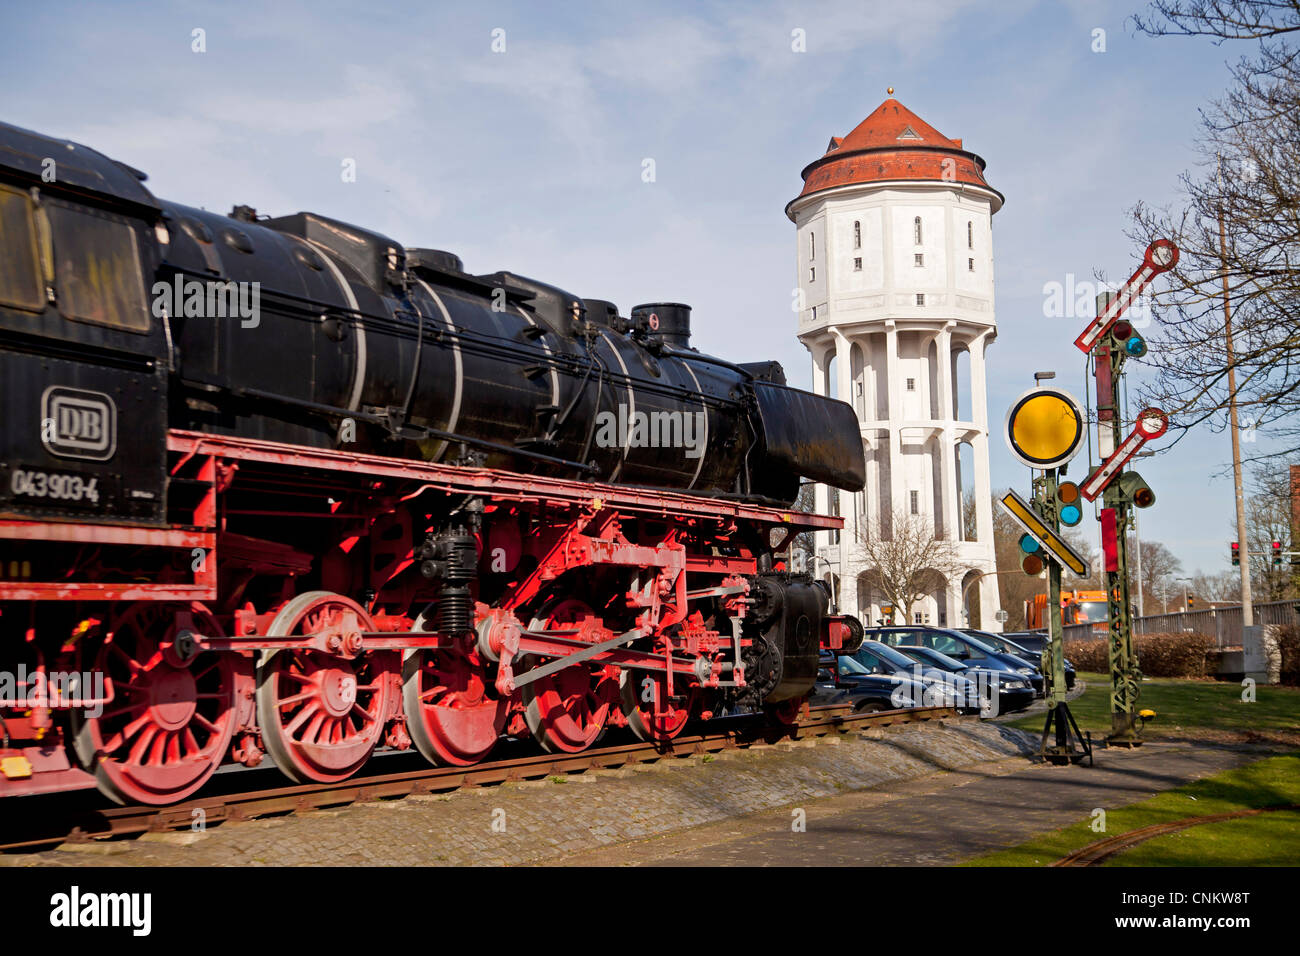 old Steam locomotive and the water tower Wasserturm in Emden, East Frisia, Lower Saxony, Germany Stock Photo